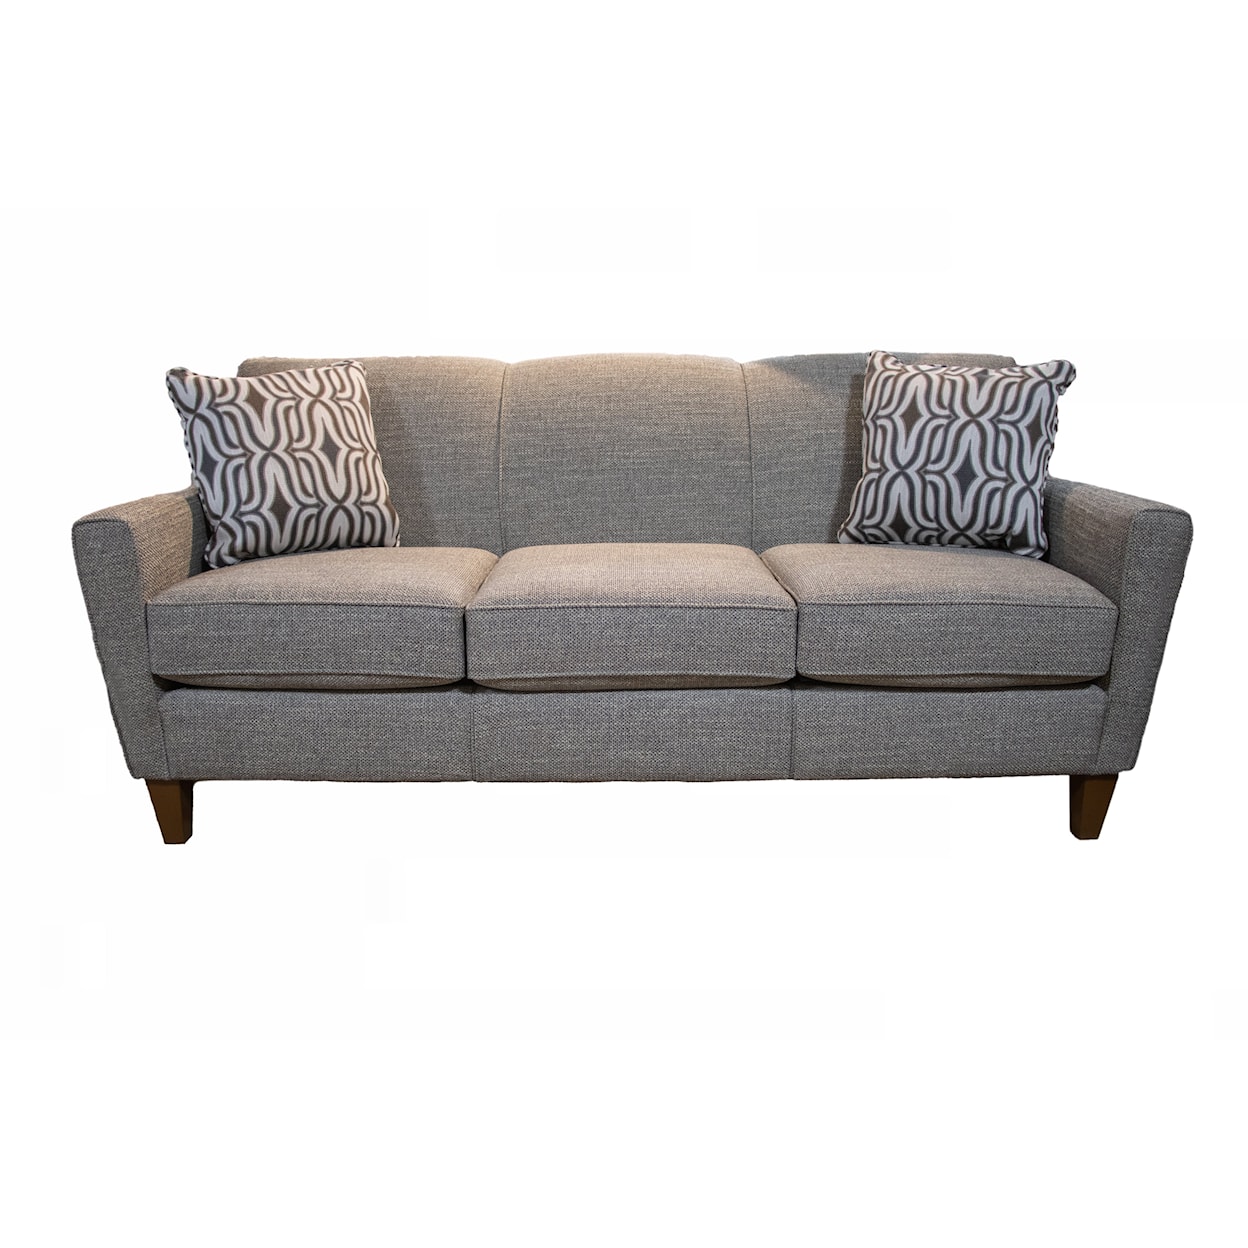 England 6200/LS Series Contemporary Upholstered Sofa